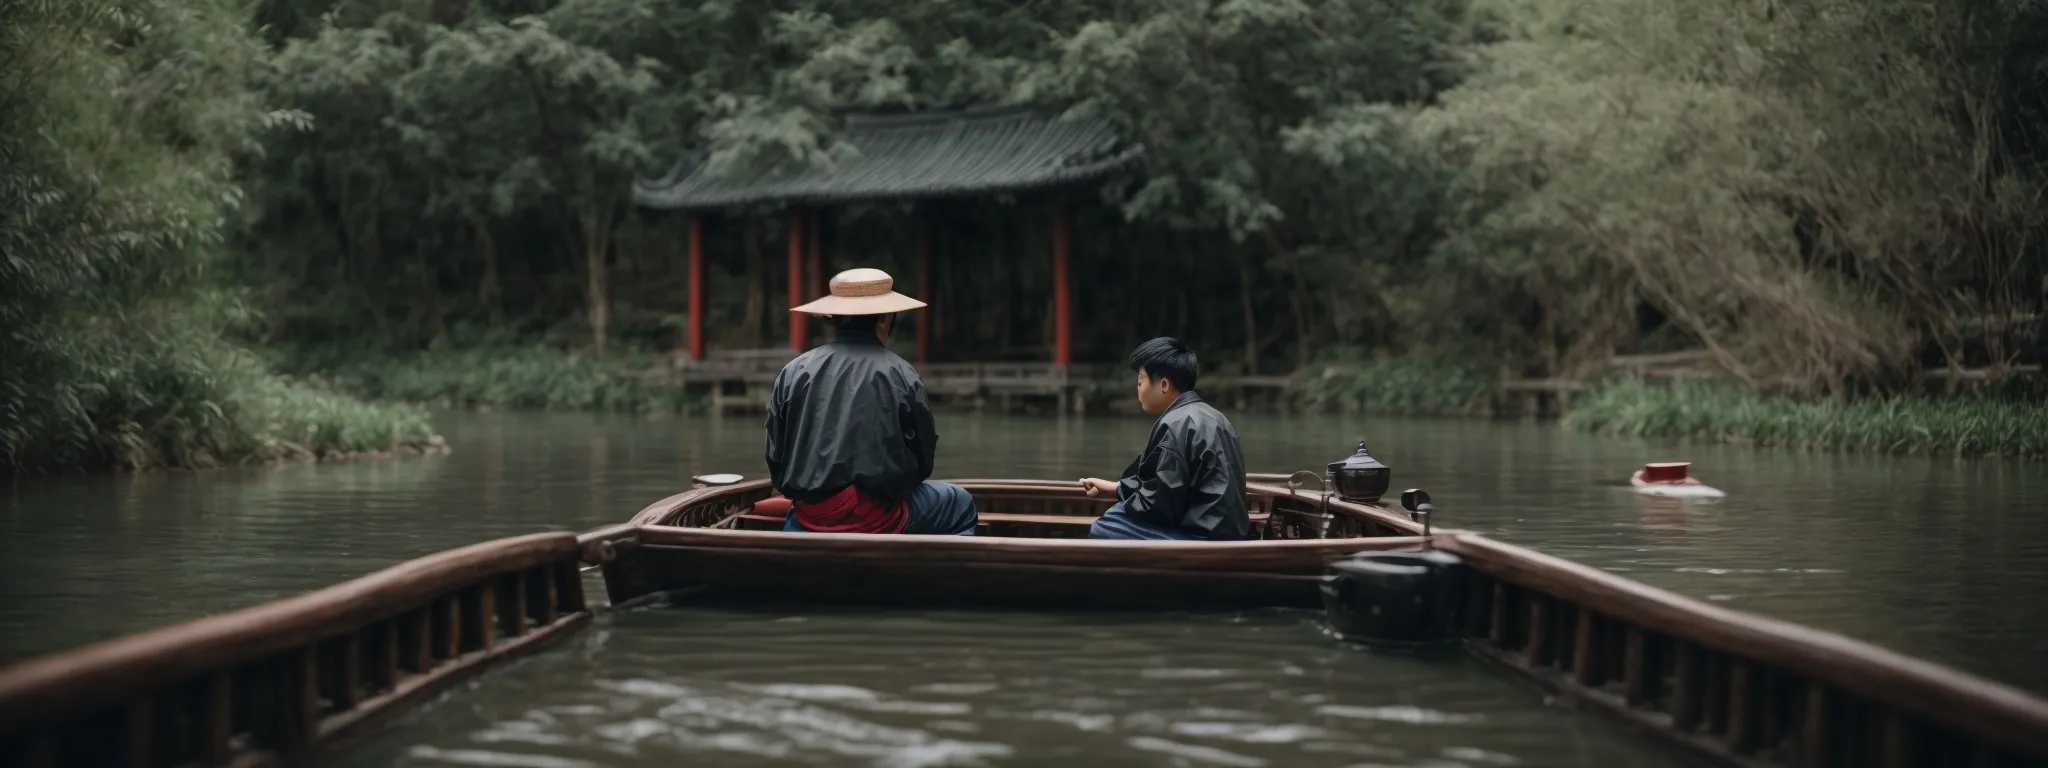 a person navigating a traditional chinese boat through a serene river labyrinth.